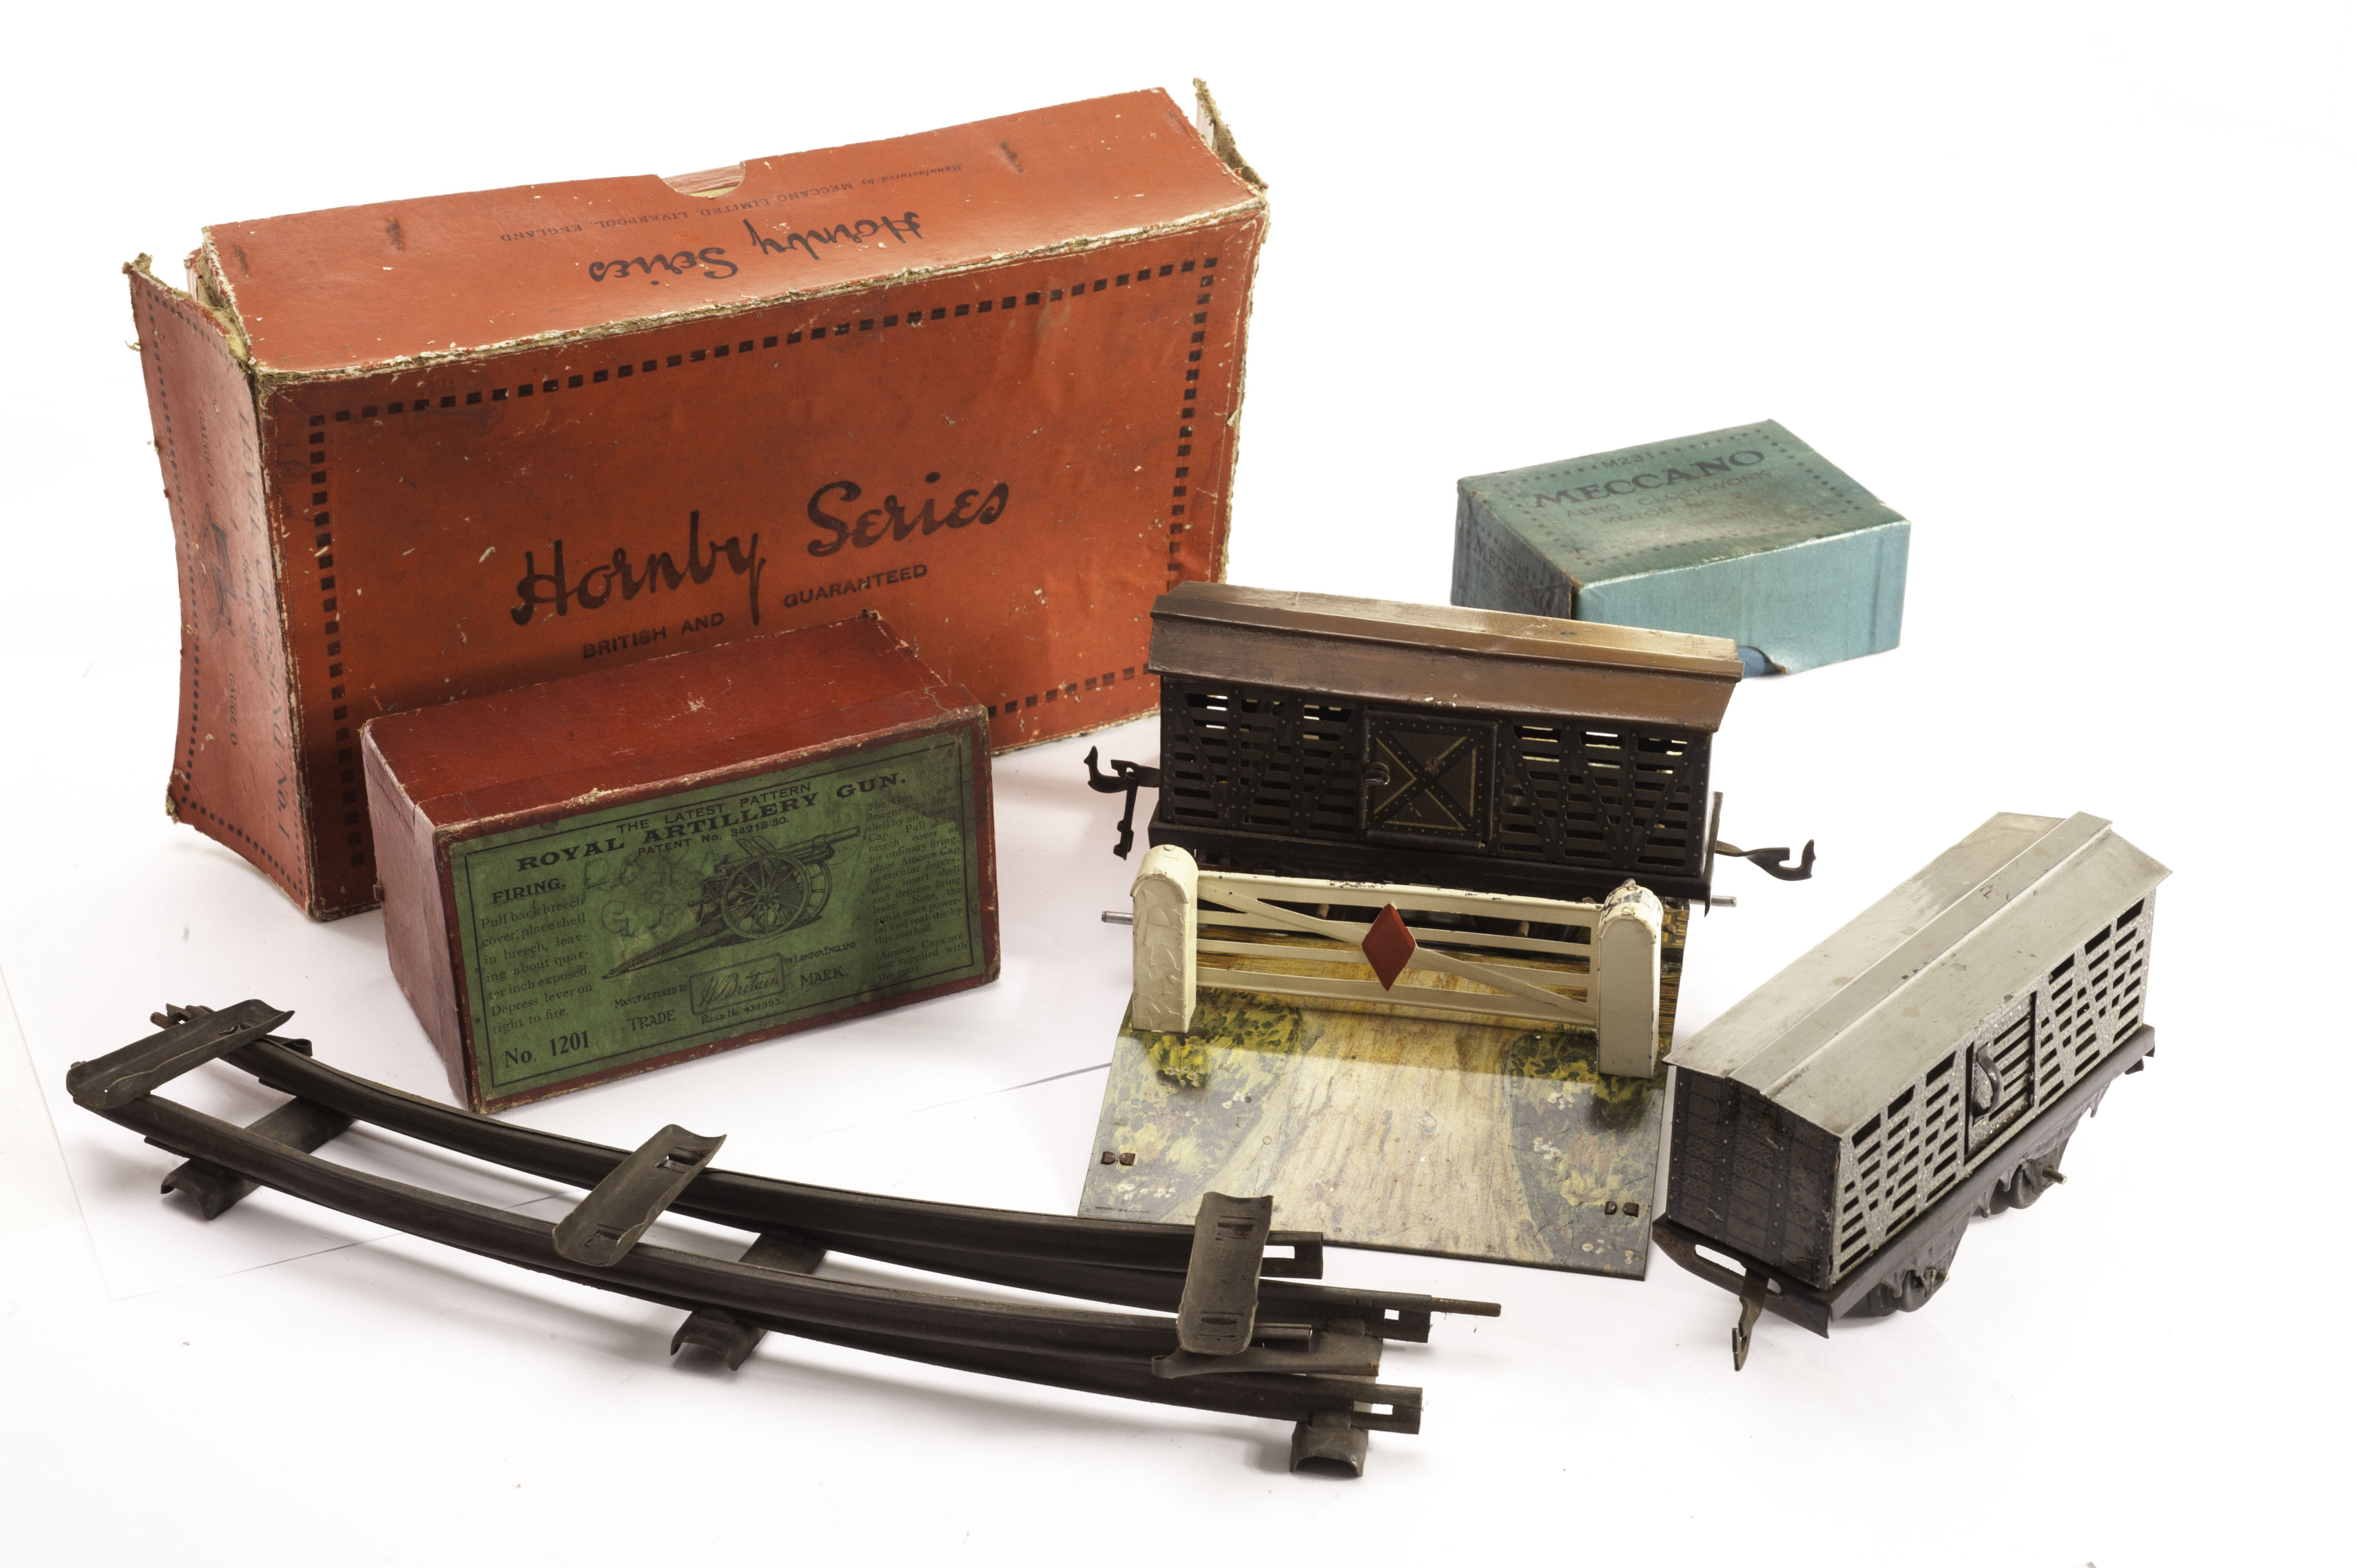 Bing and Hornby 0 Gauge Accessories and Track: including unboxed Bing Home Signal, two cattle